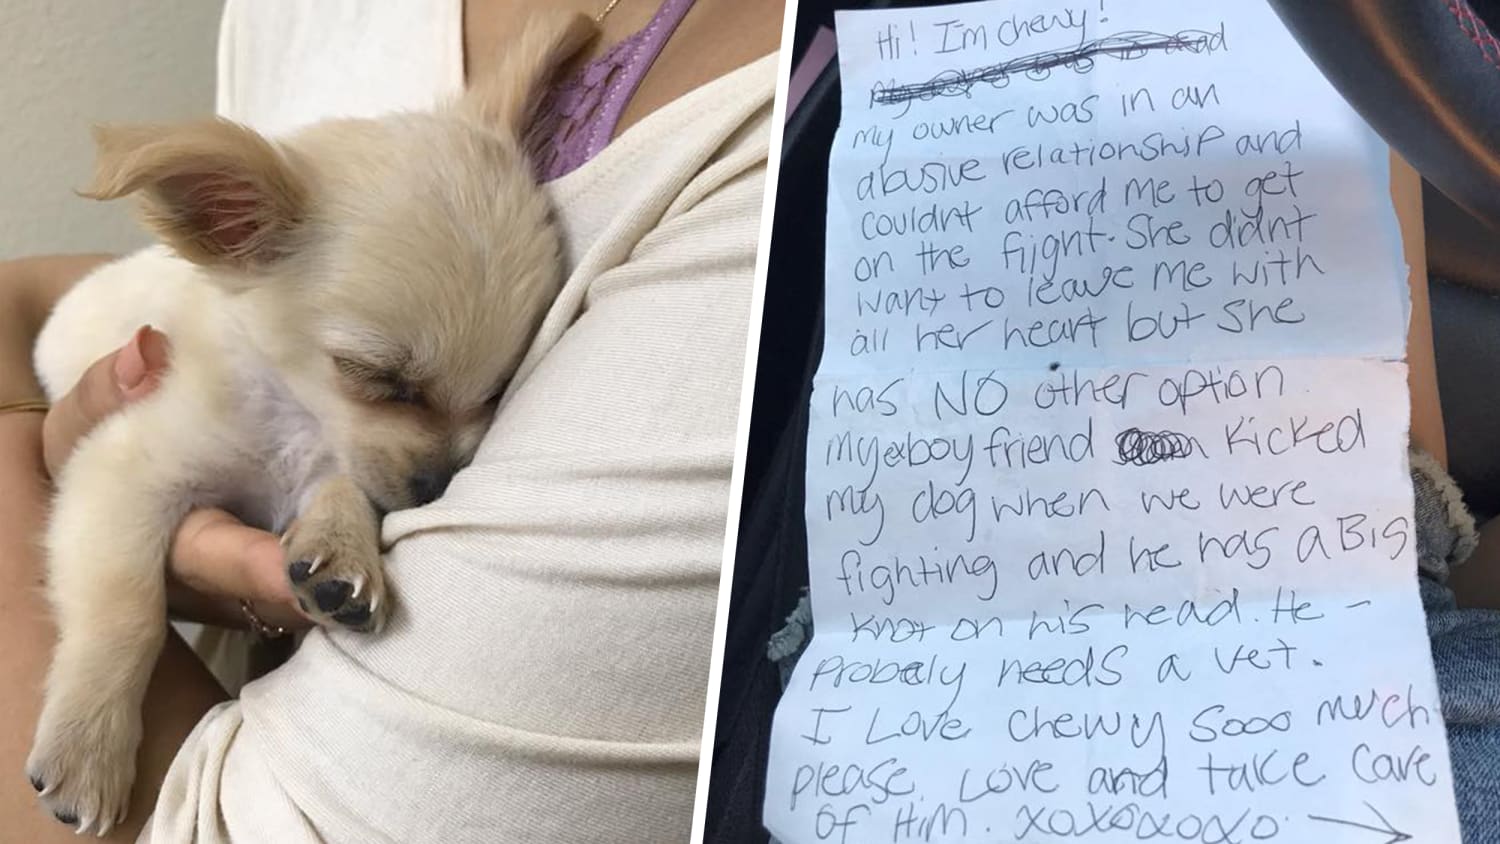 Dog left at airport with sad note about domestic violence